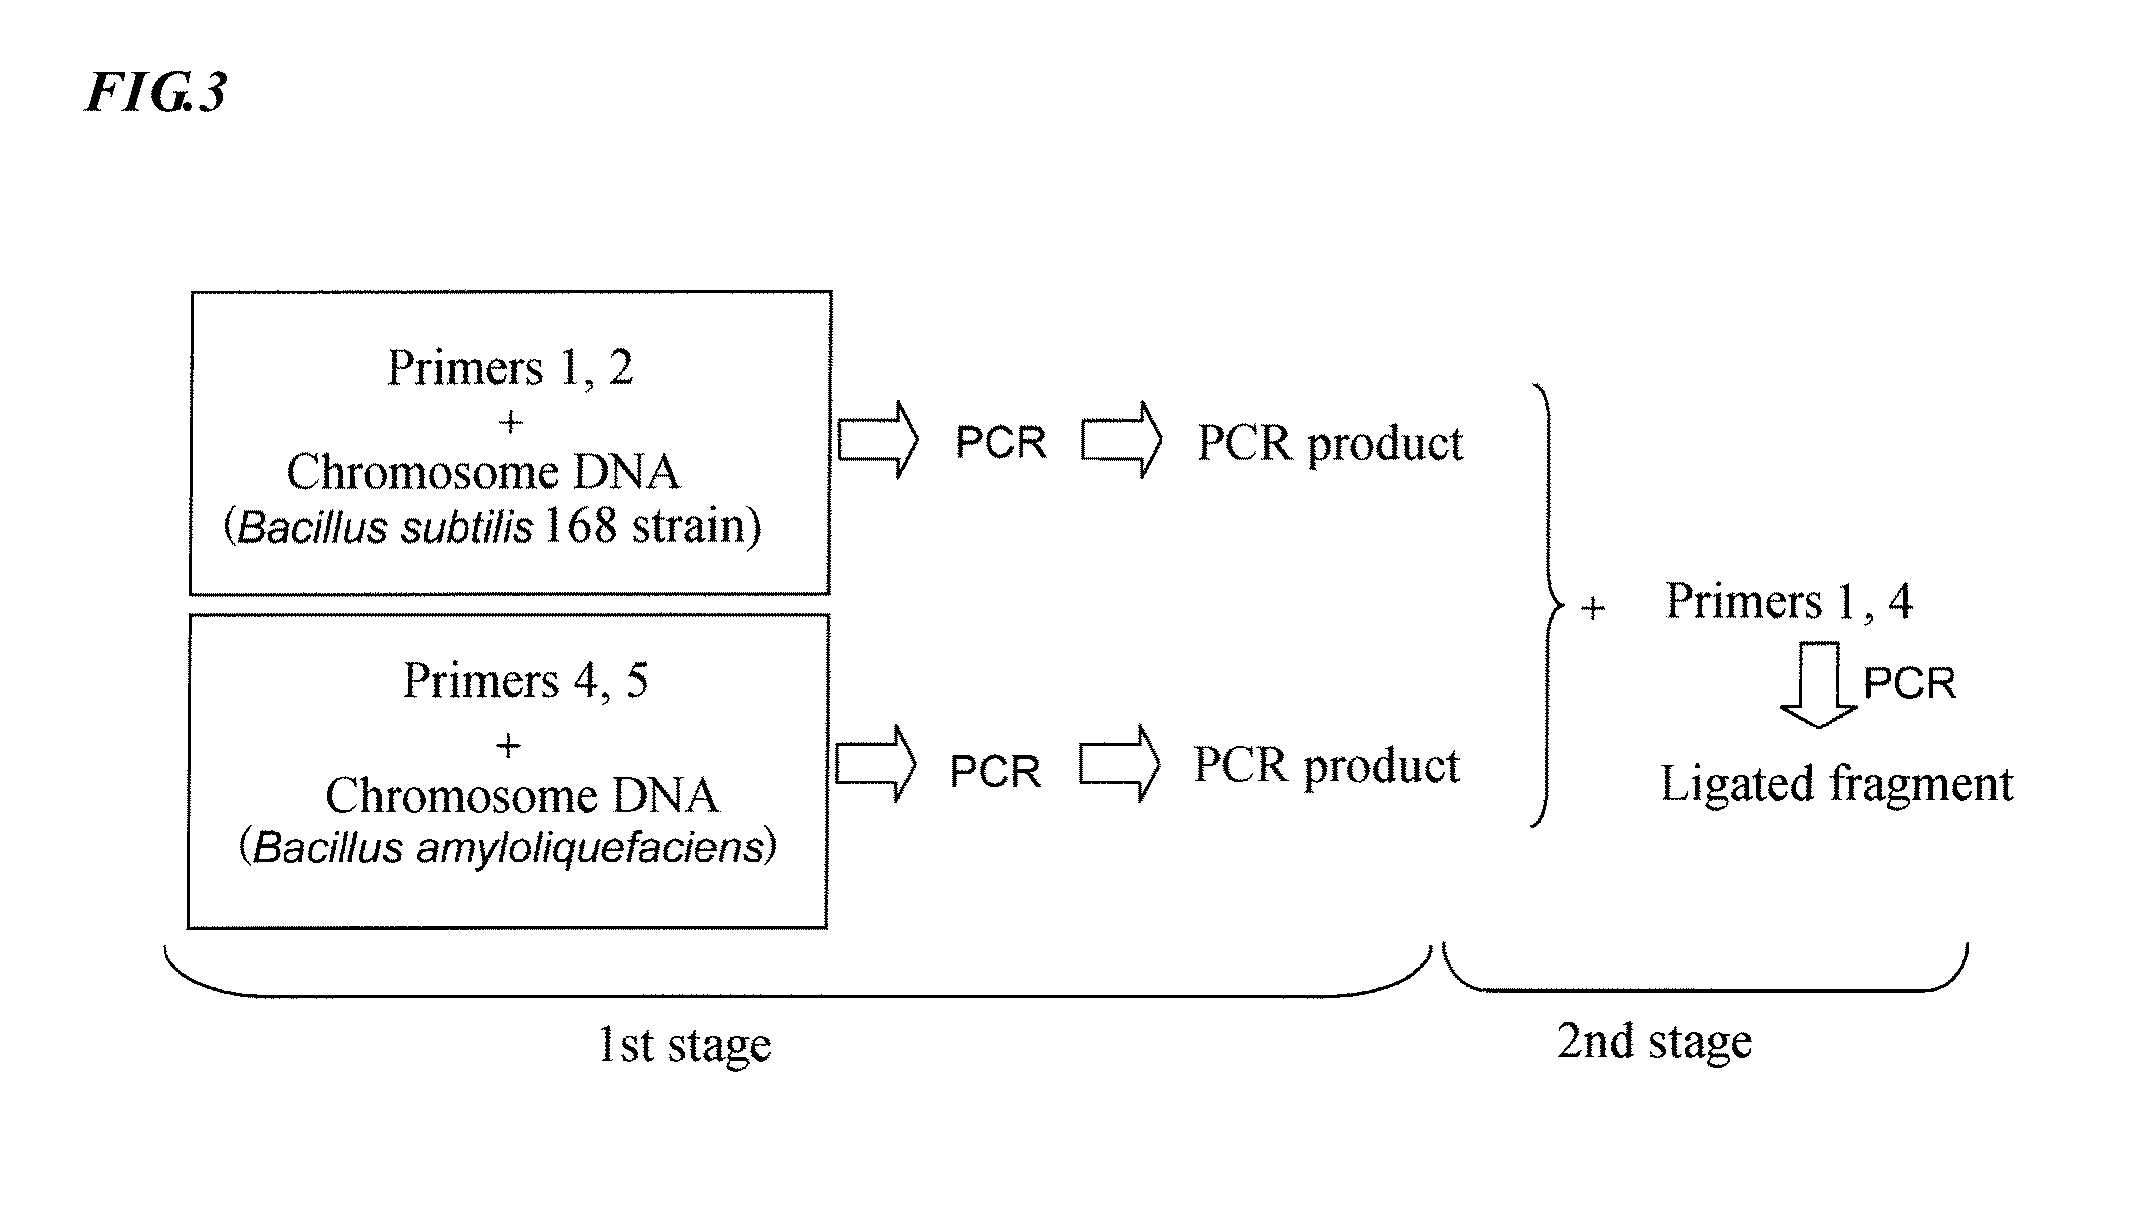 Recombinant expression plasmid vector and recombinant strain to be used in producing oxalate decarboxylase, and method of producing recombinant oxalate decarboxylase